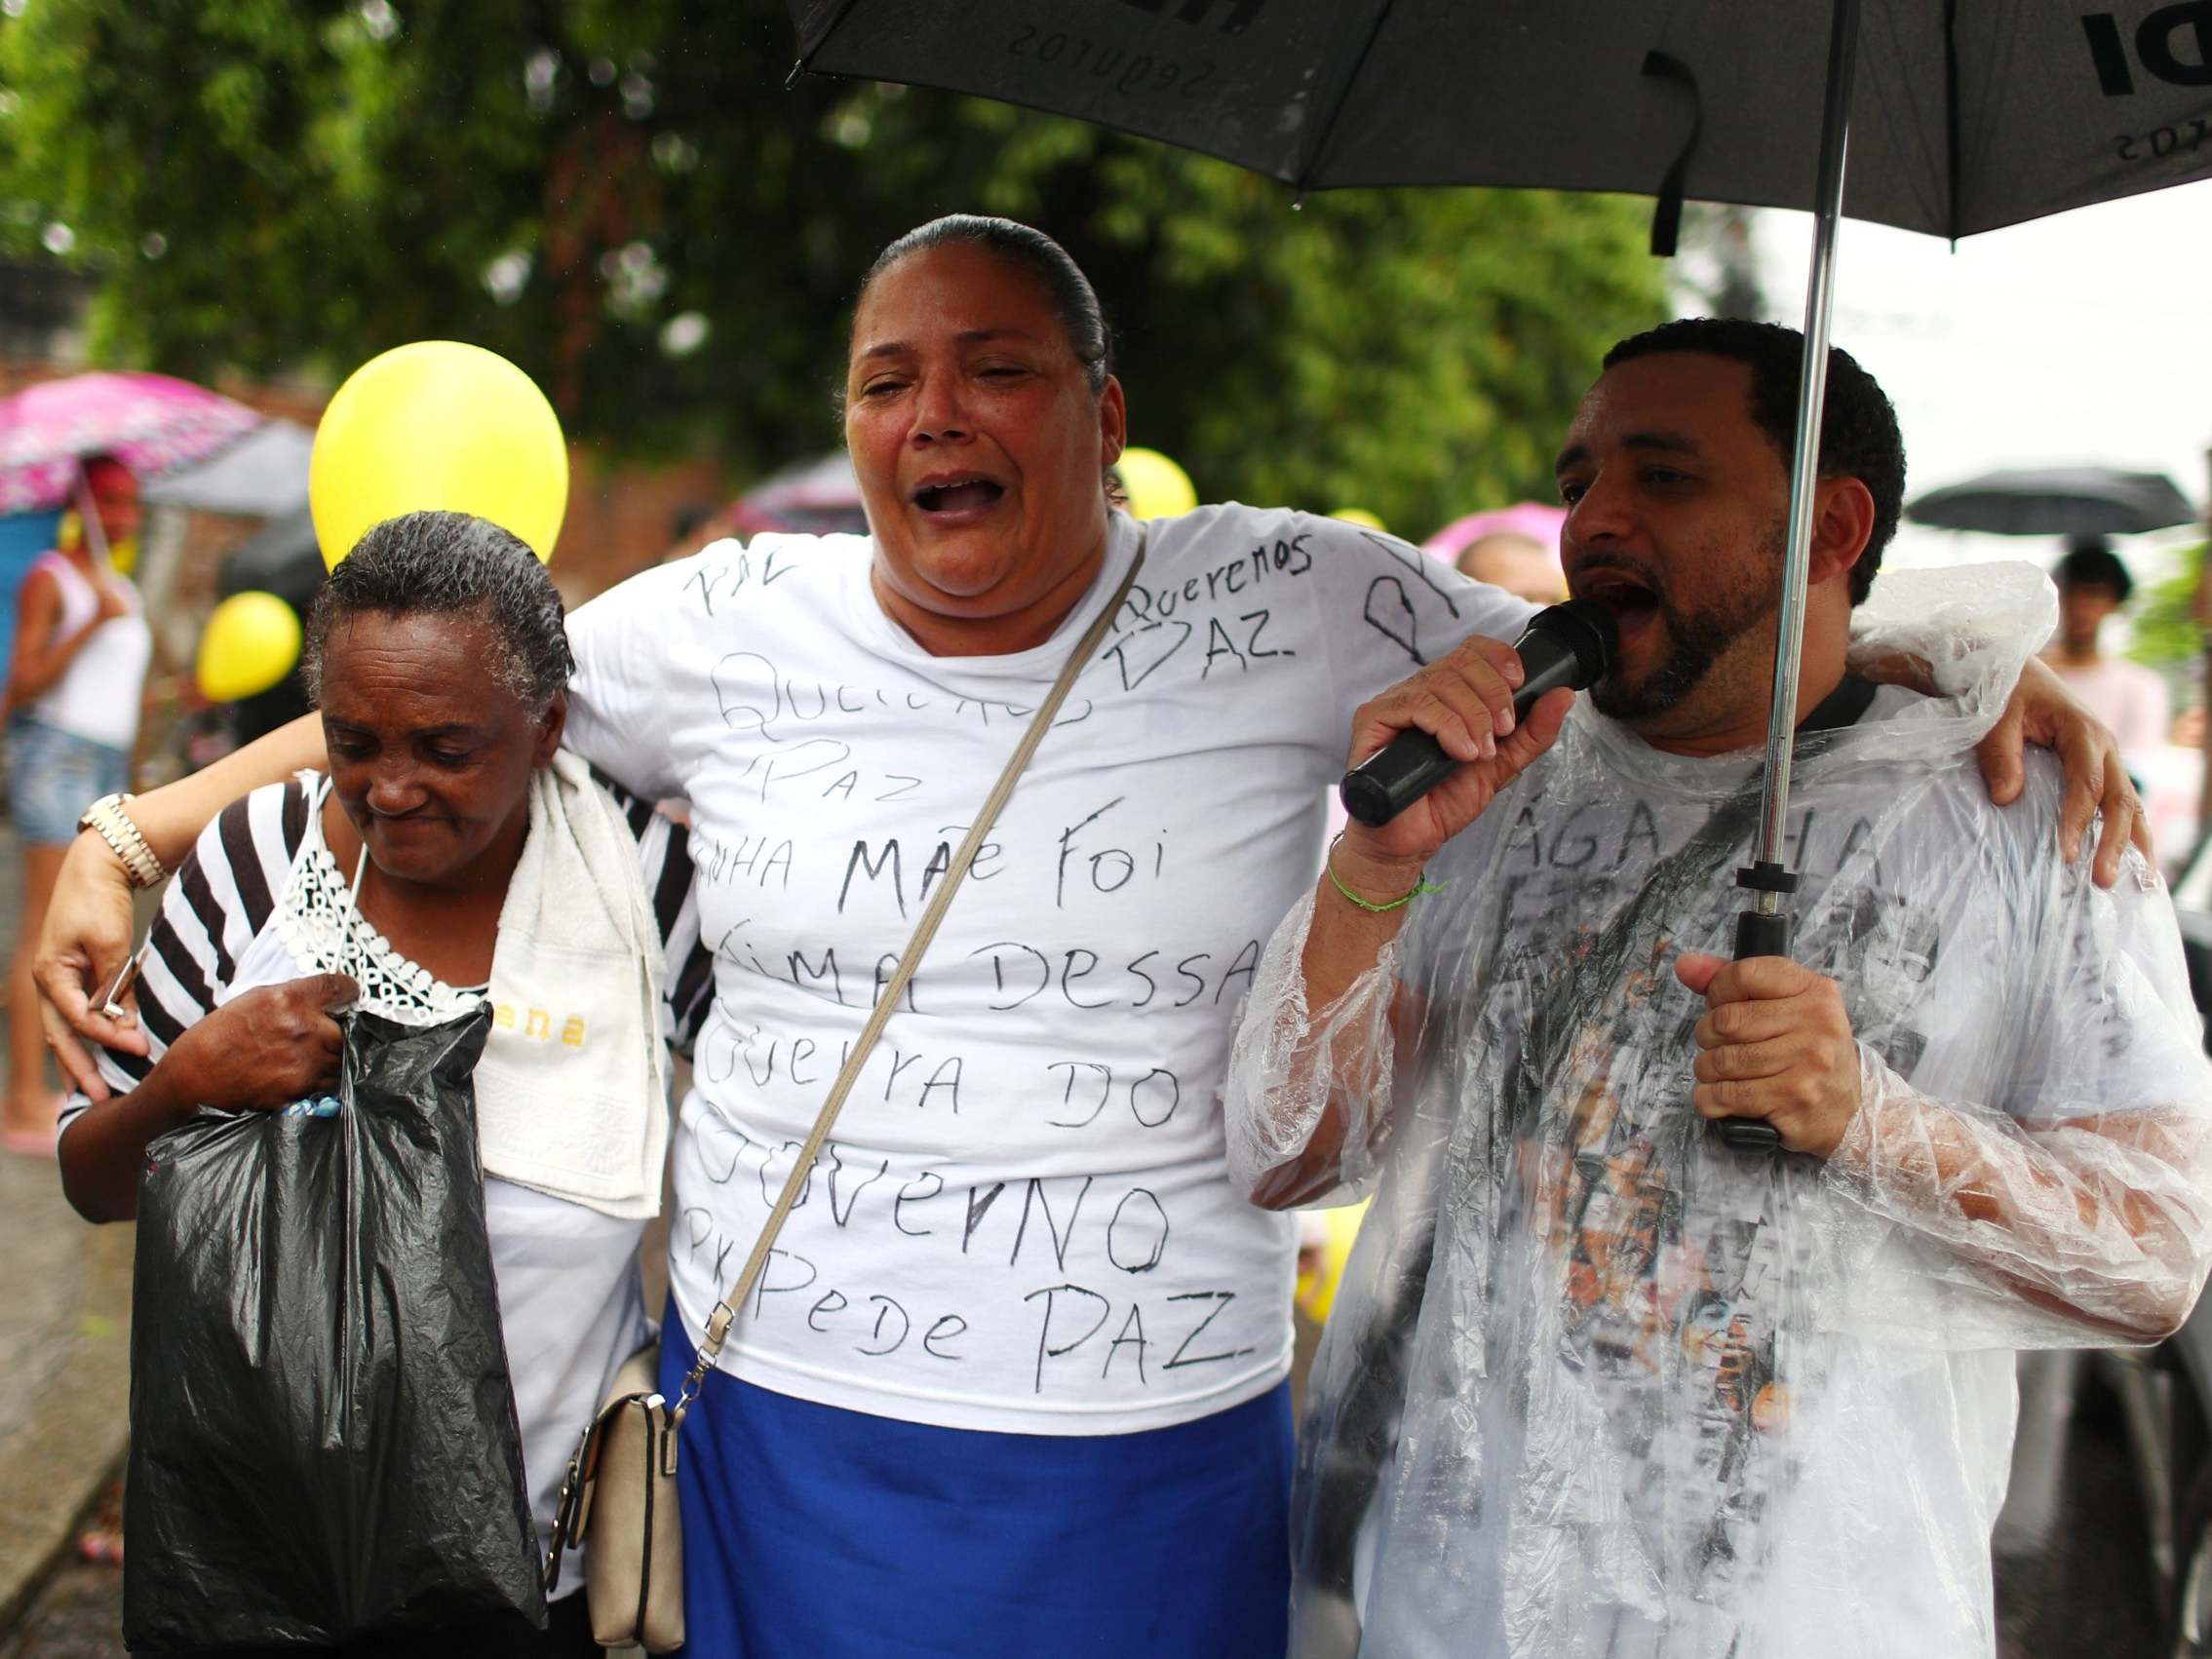 Residents of Complexo do Alemao march in protest over the death of eight -year-old Agatha Felix